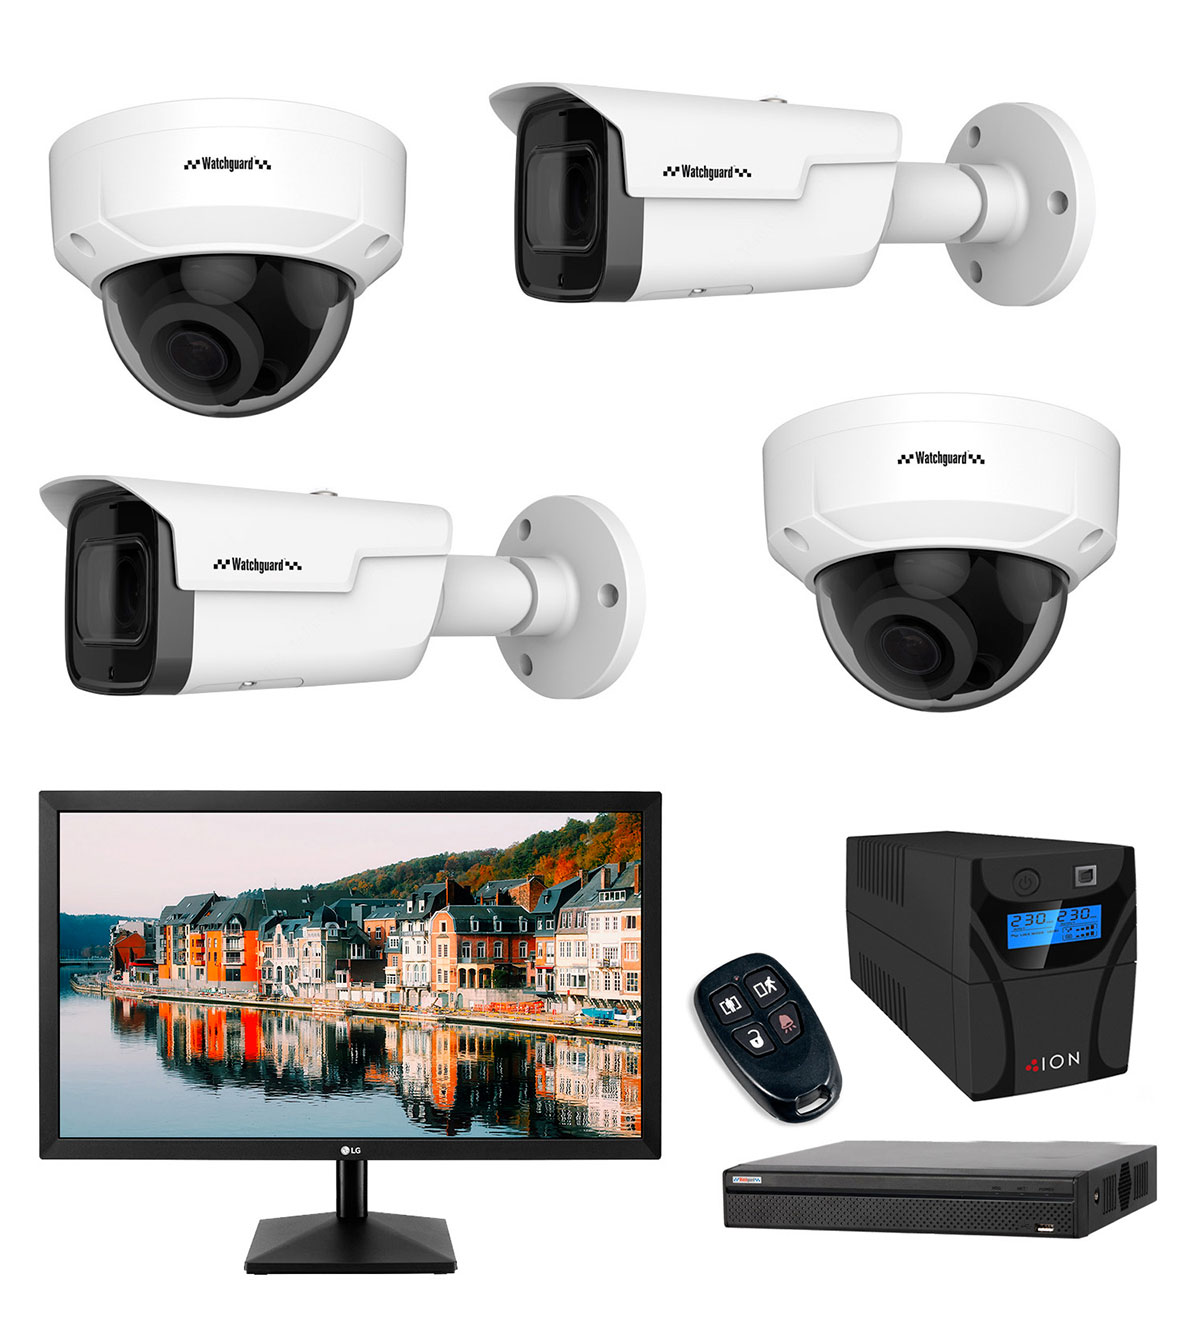 Watchguard - Affordable CCTV 4 channel IP Network Camera System